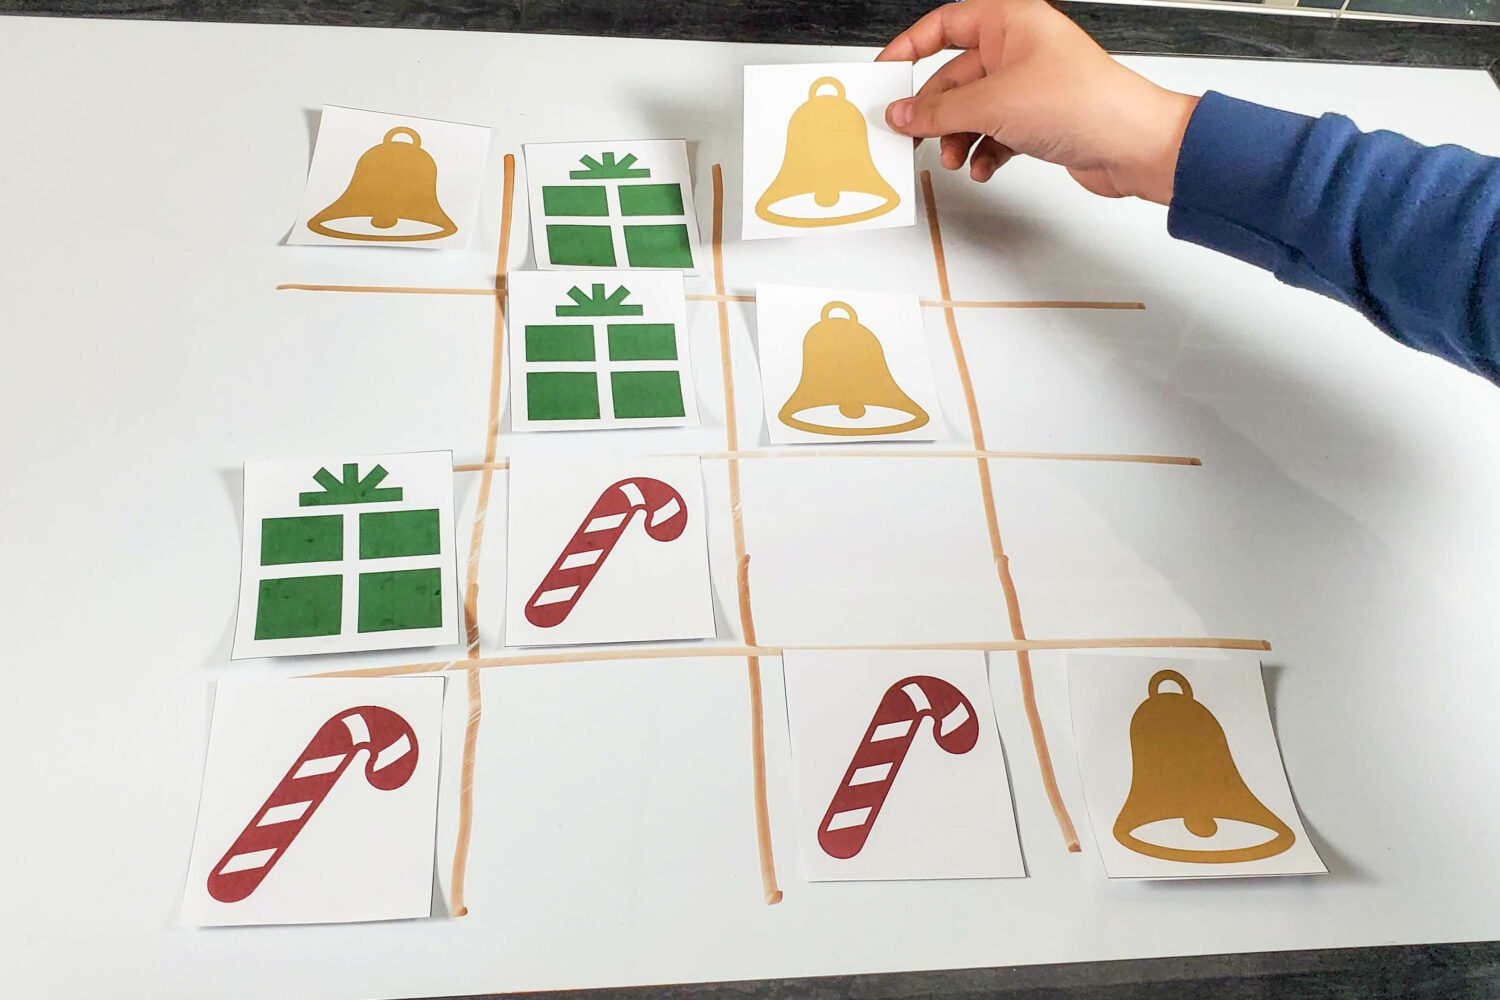 Christmas Tic Tac Toe - A fun 3 player Tic Tac Toe (or 3 teams) with symbols for the shepherds, angels, and wise men and lots of repetition for a single song, mix of songs, or 3 Christmas songs of your choice! Fun singing time idea or printable game for families.